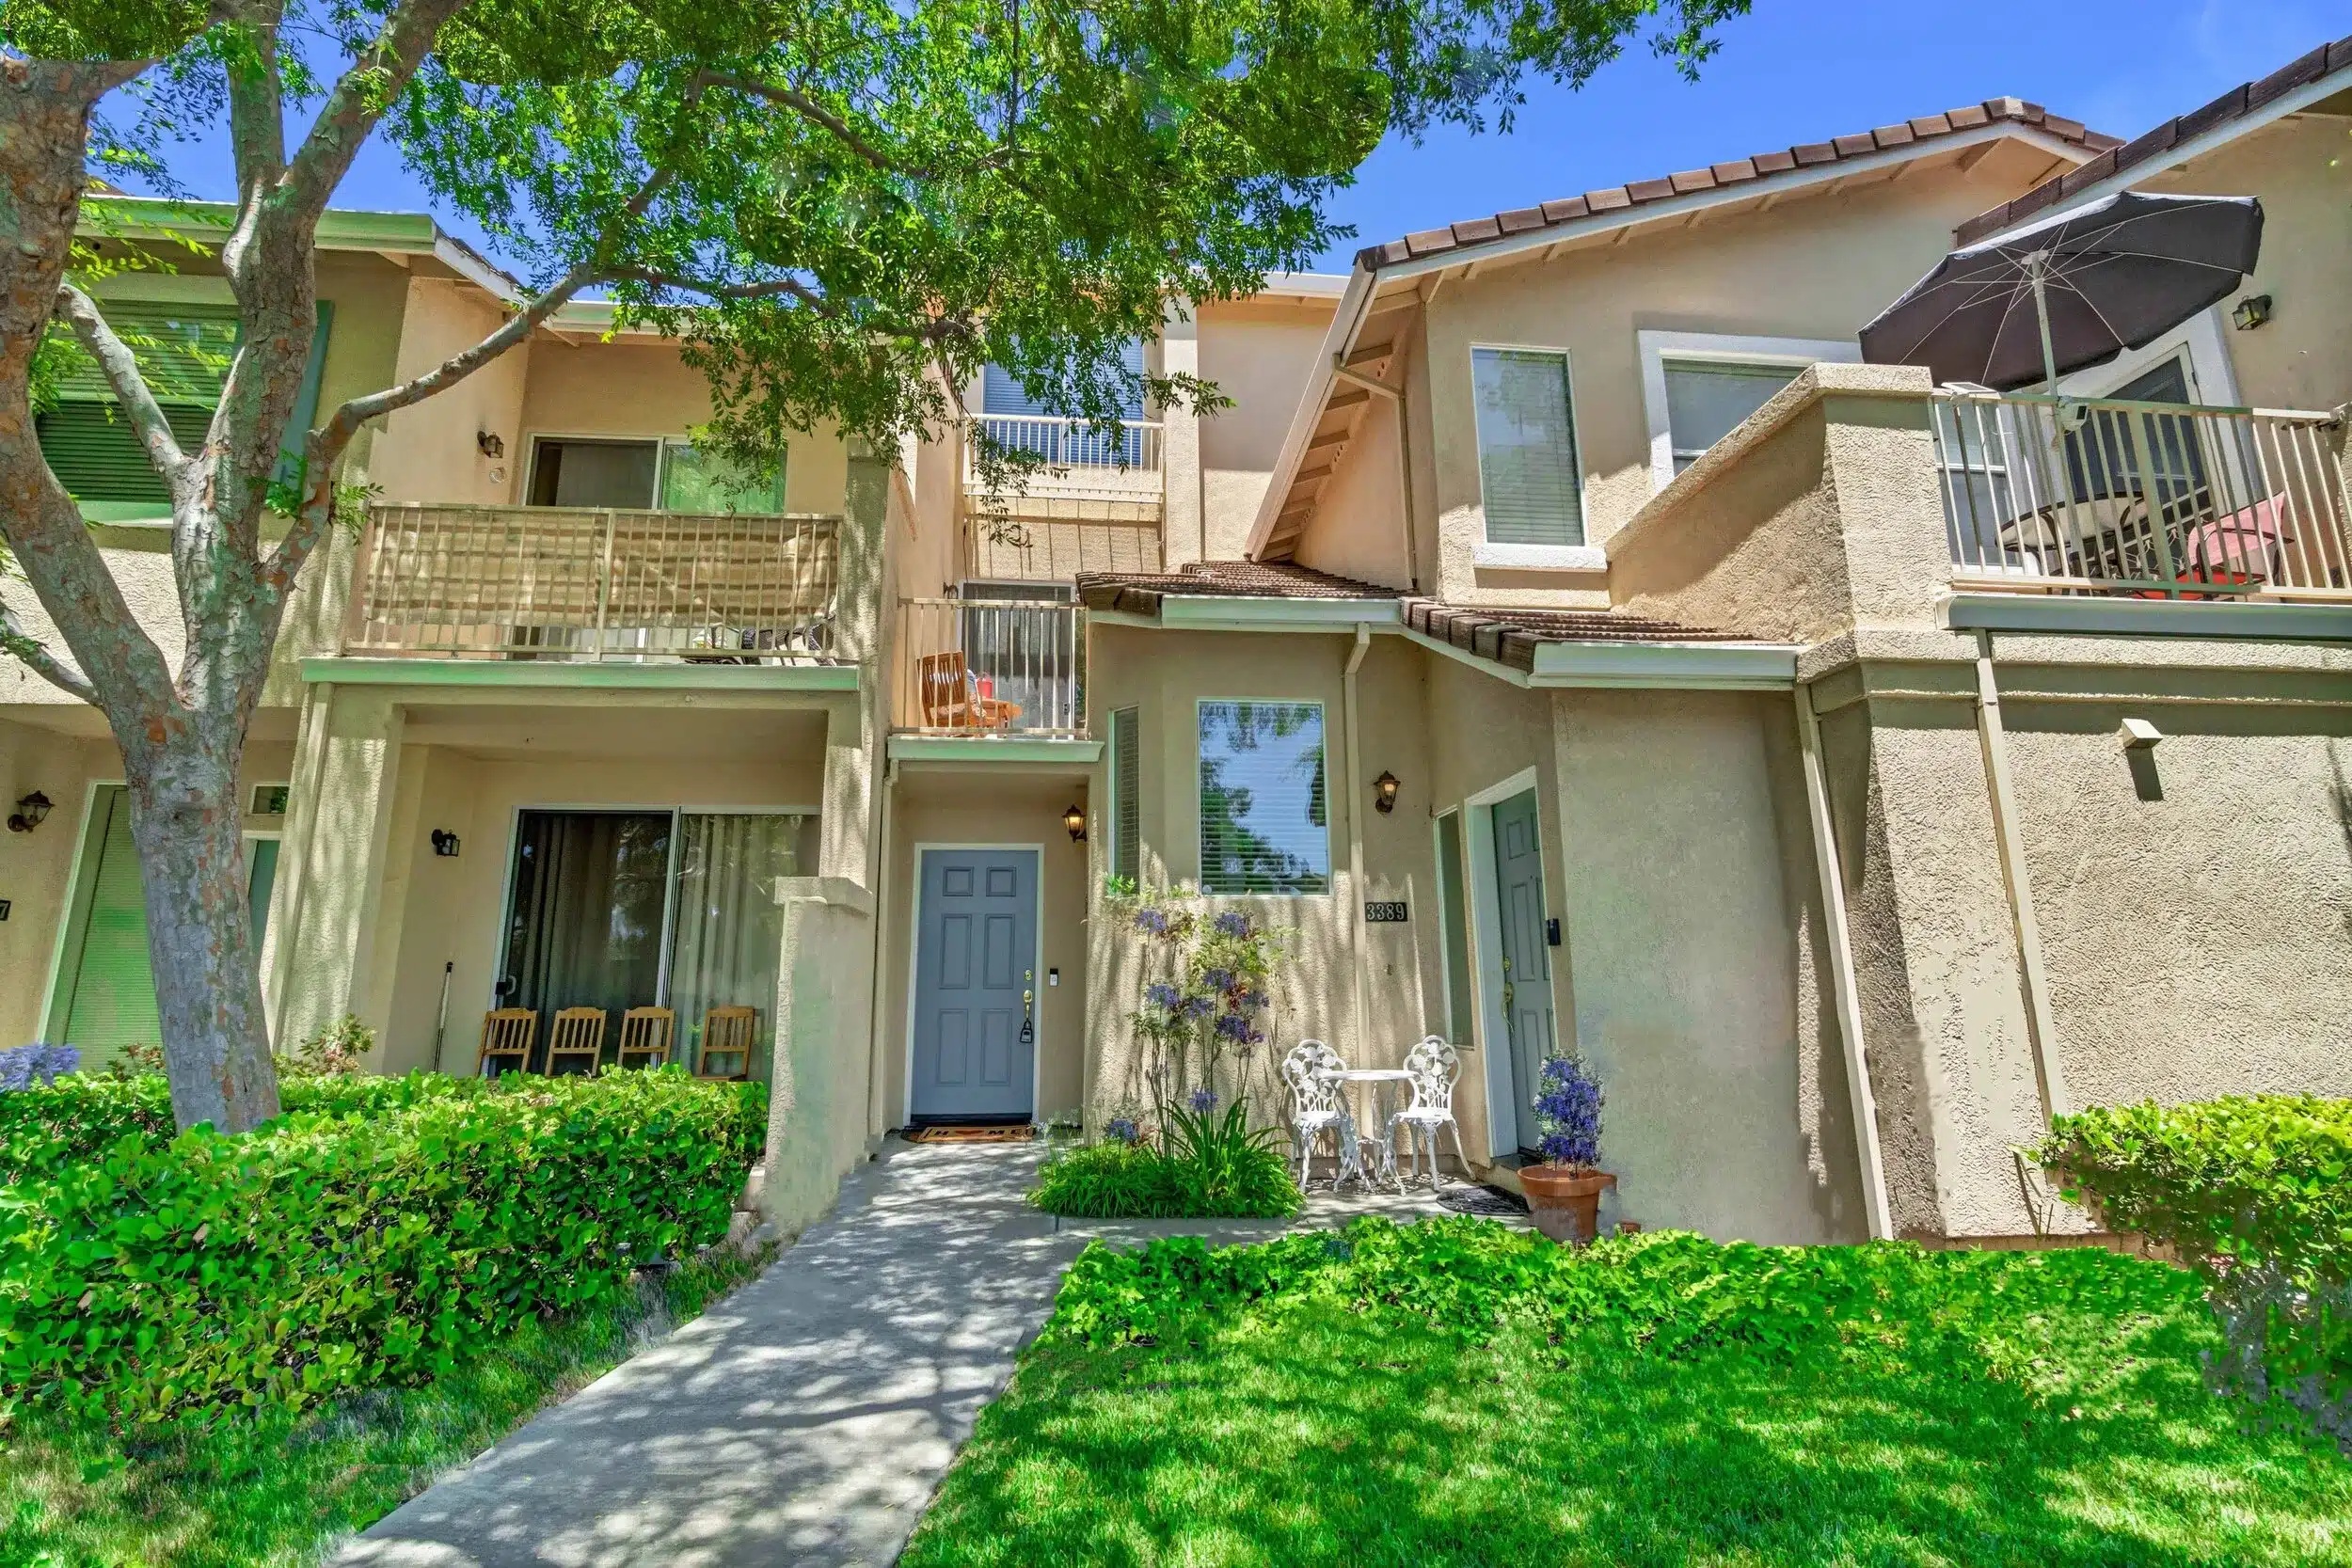 SOLD – Treat yourself to easy-care living in a convenient location in San Jose